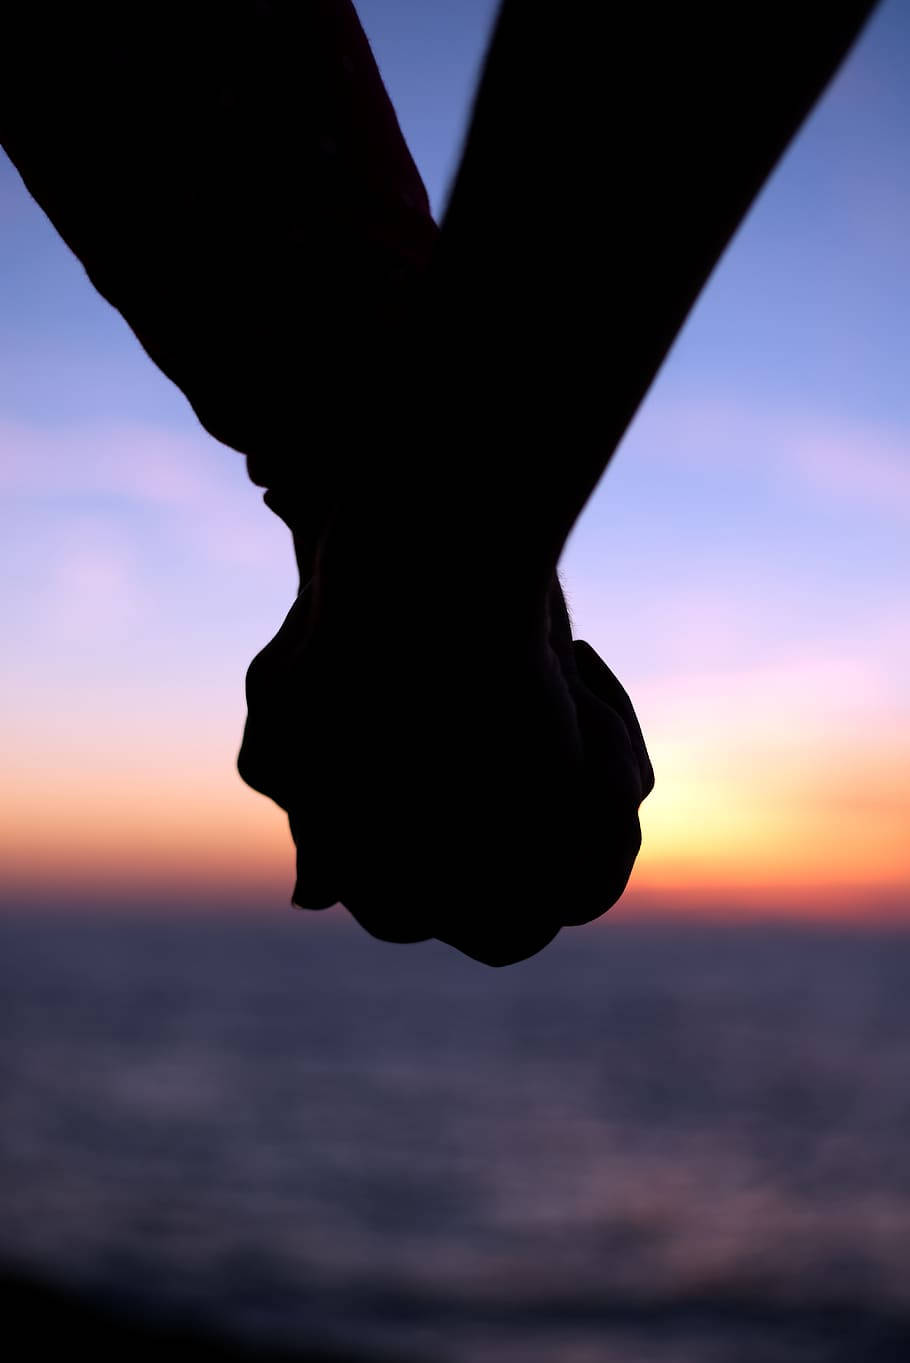 holding hands in the sunset